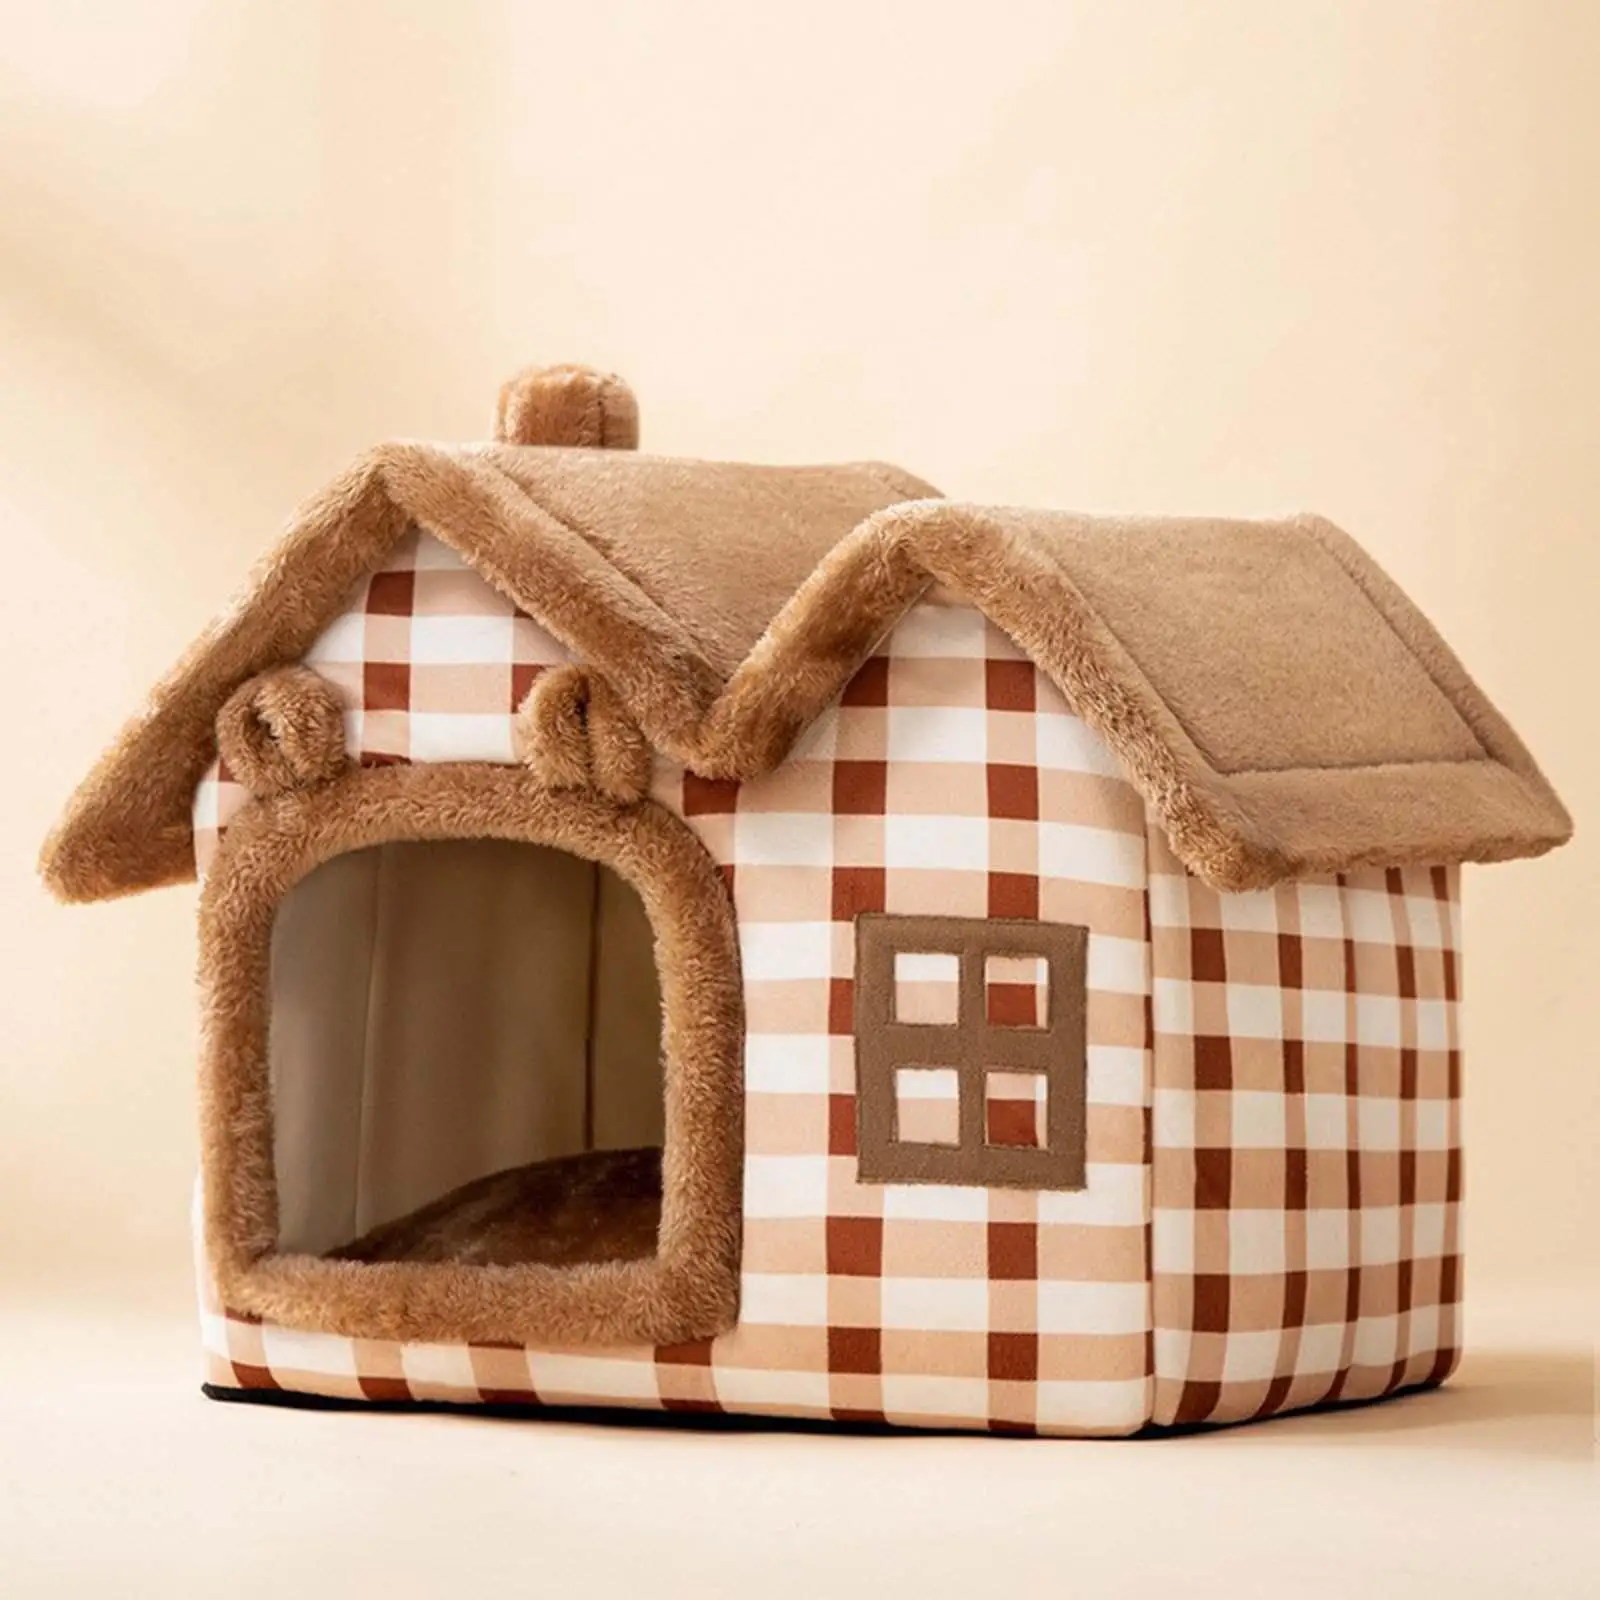 Soft Double Roof Houses Cat Sleeping Bed for Small Medium Large Dogs Cat